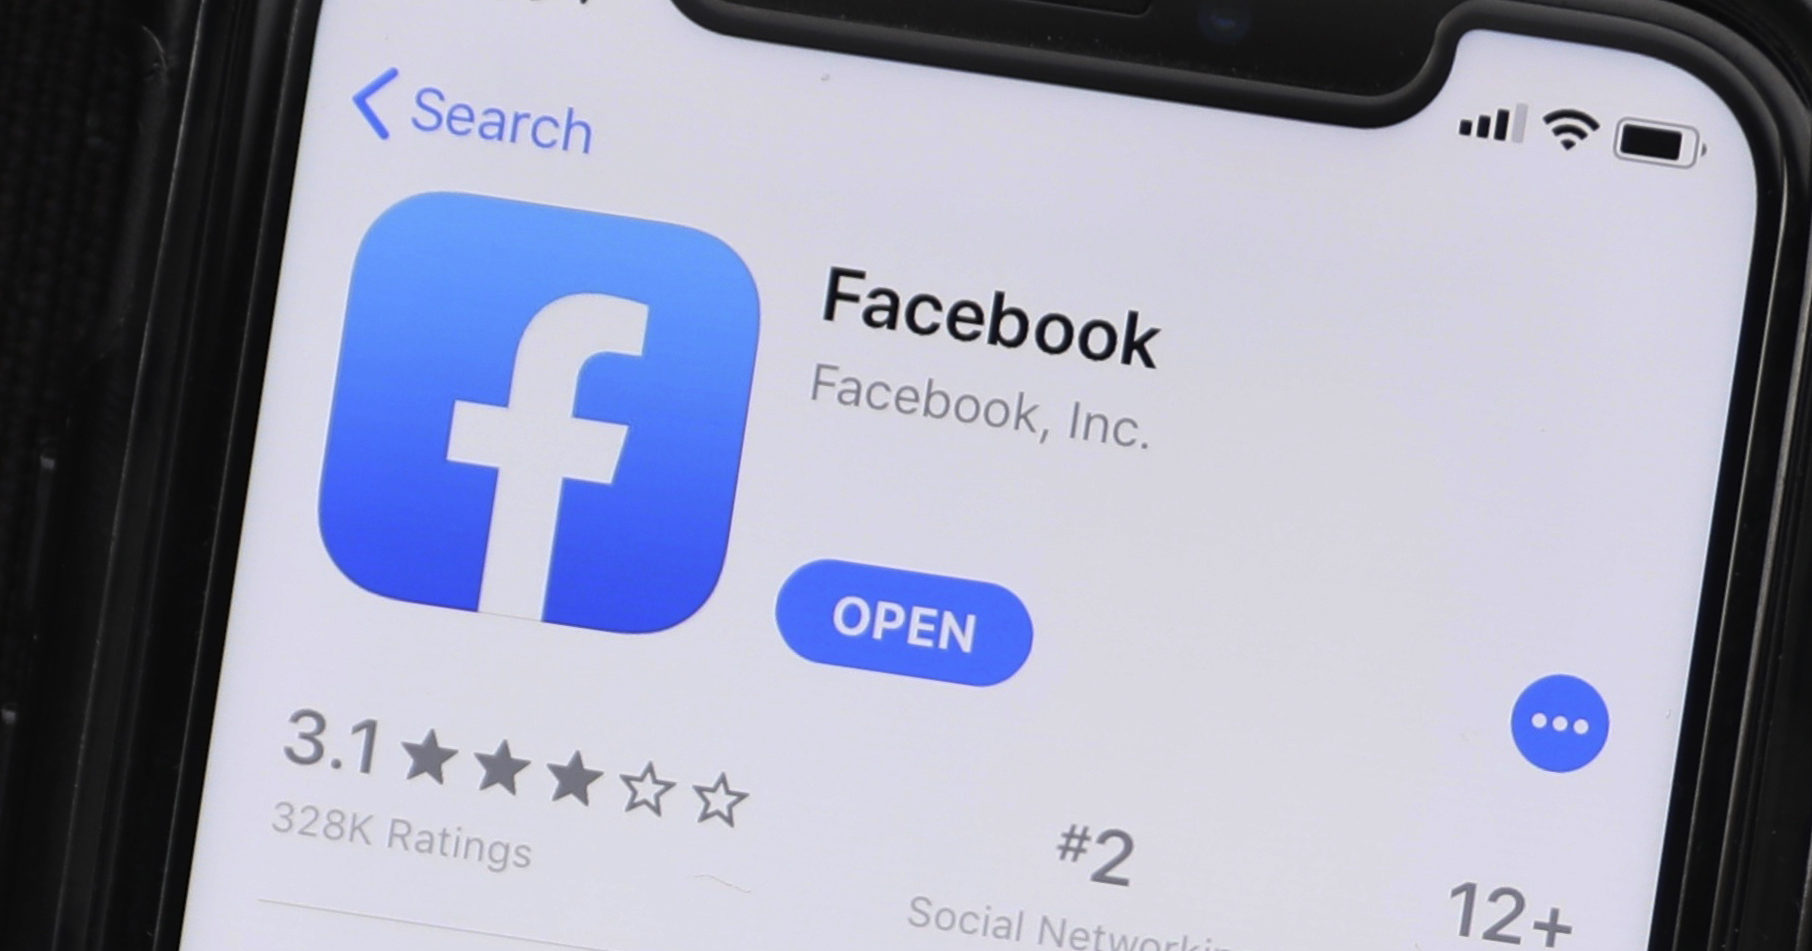 This July 30, 2019, file photo shows update information for the Facebook application on a mobile phone displayed at a store in Chicago.